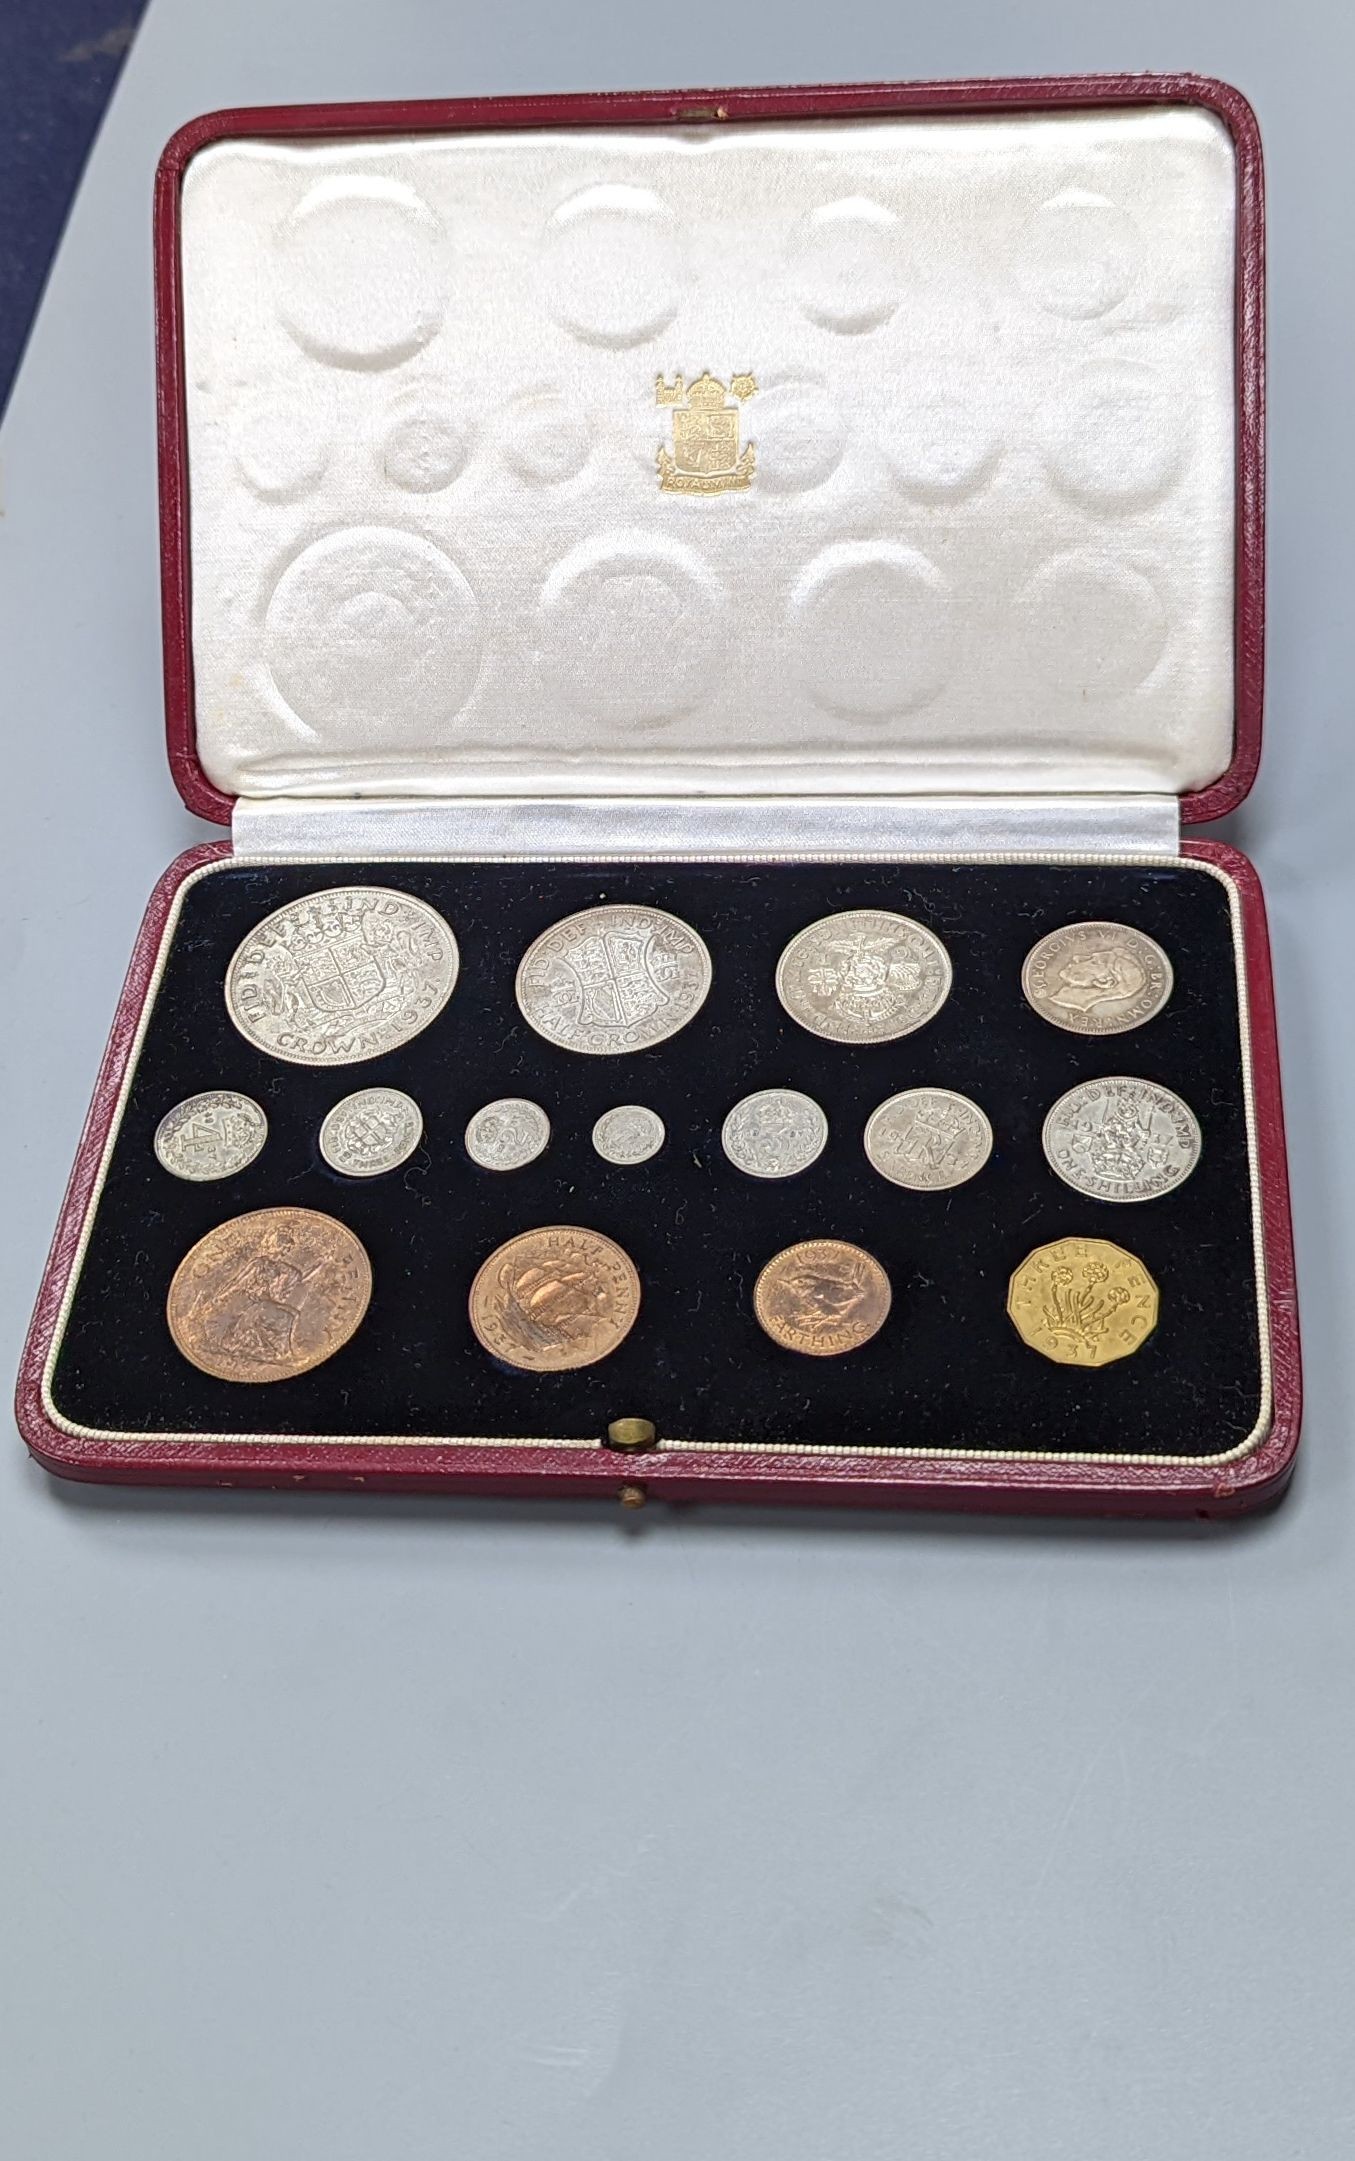 A cased George V coronation year 1937 specimen coin set, all toned UNC.